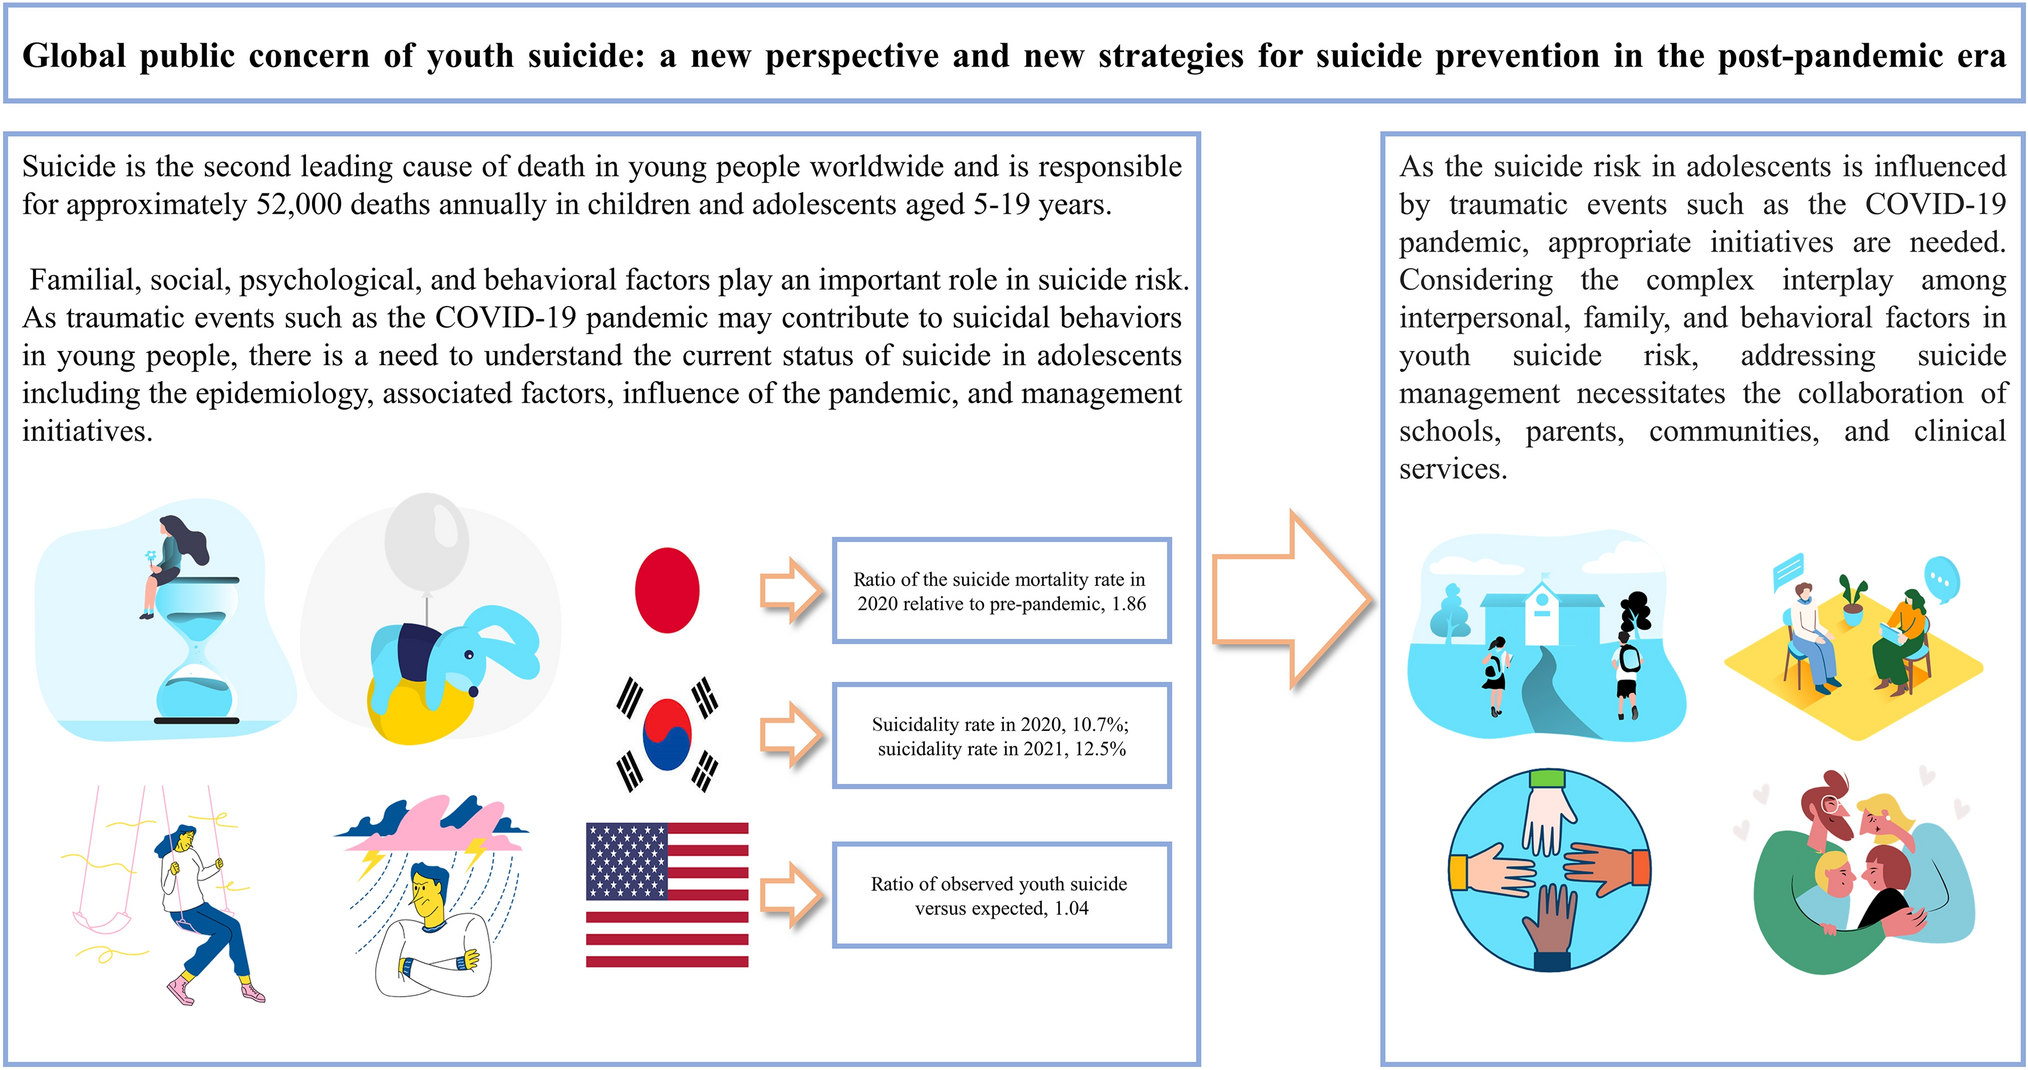 Global public concern of childhood and adolescence suicide: a new perspective and new strategies for suicide prevention in the post-pandemic era